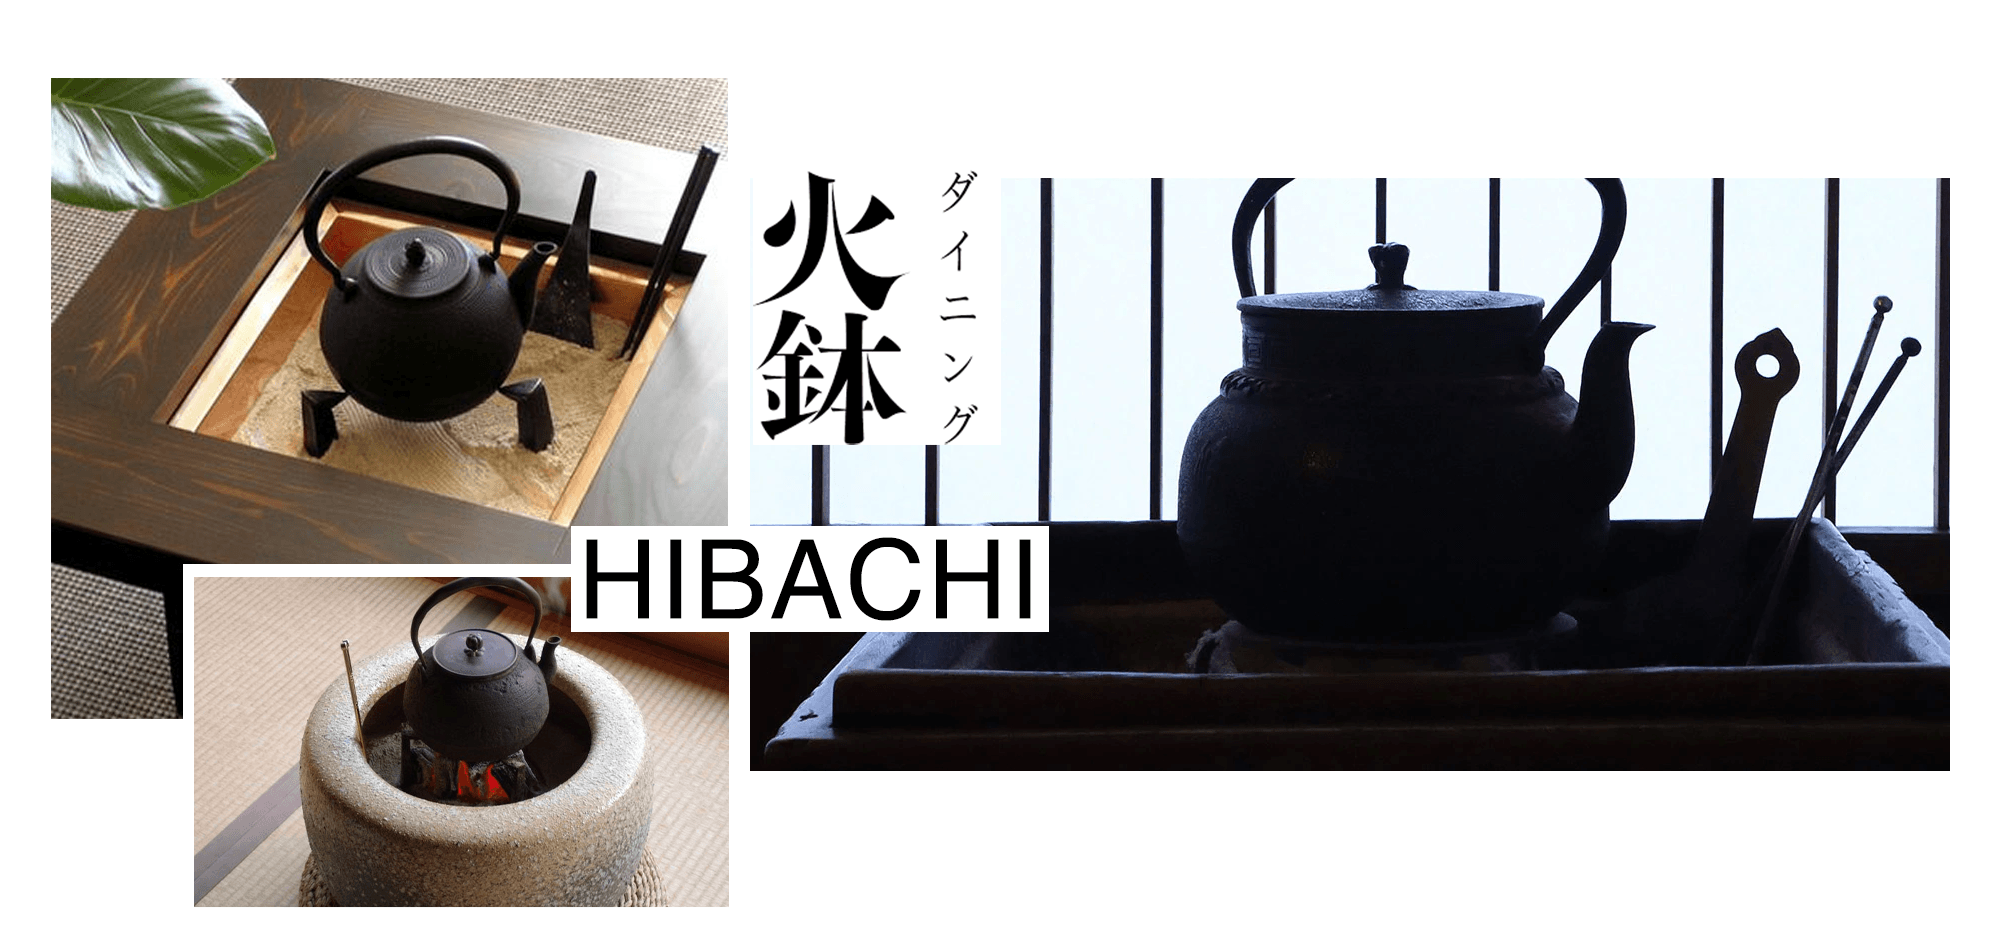 Why not call Japanese BBQ grills hibachi grills?